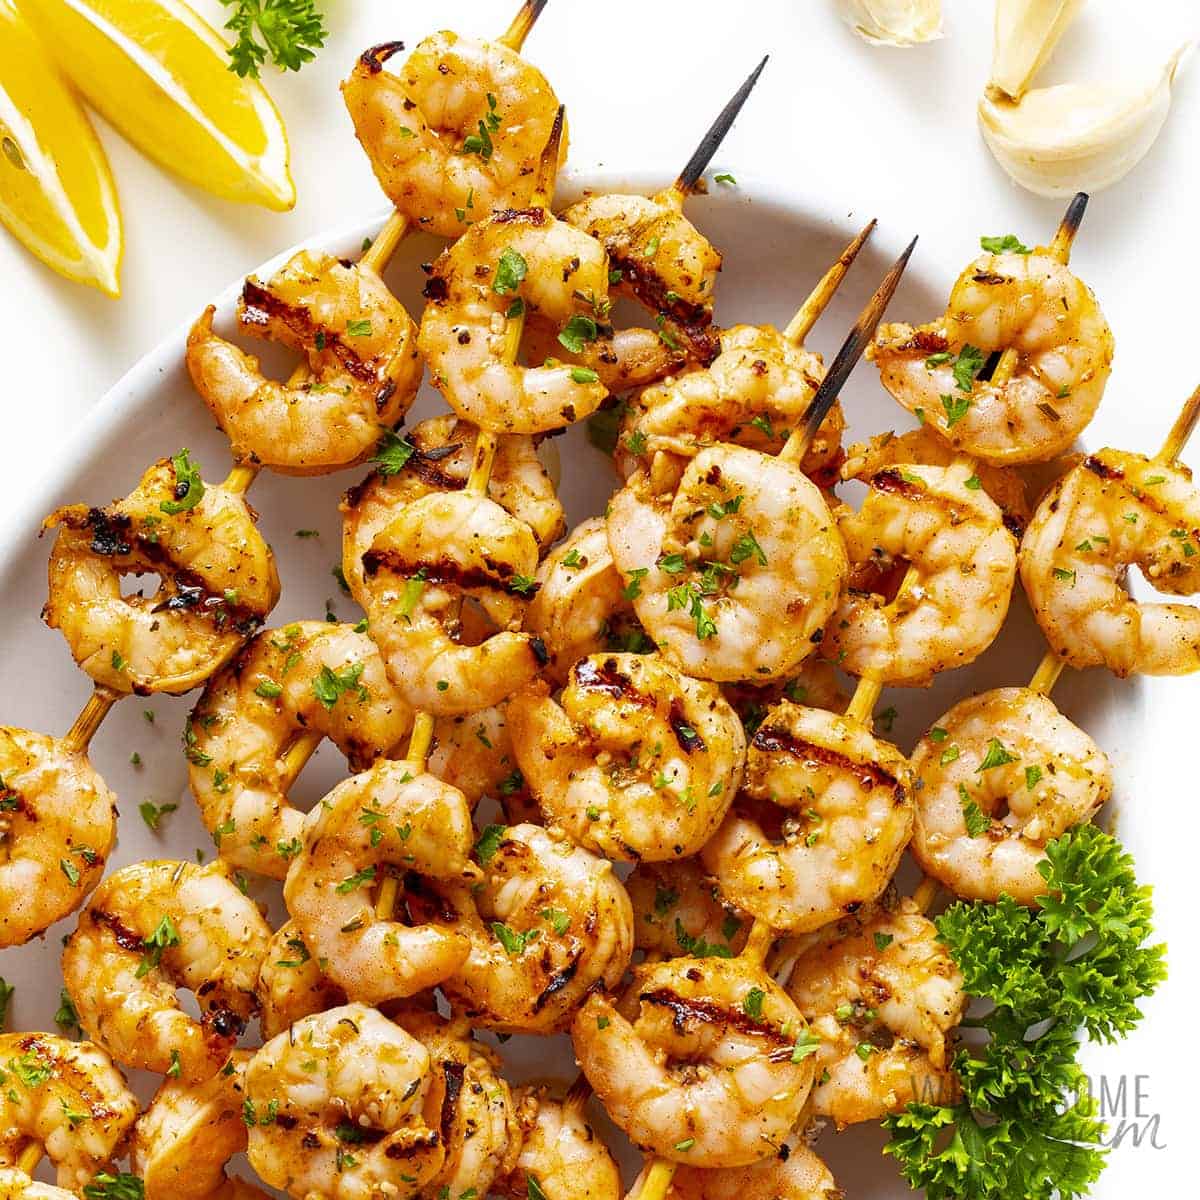 Grilled Shrimp Skewers Recipe from https://www.wholesomeyum.com/